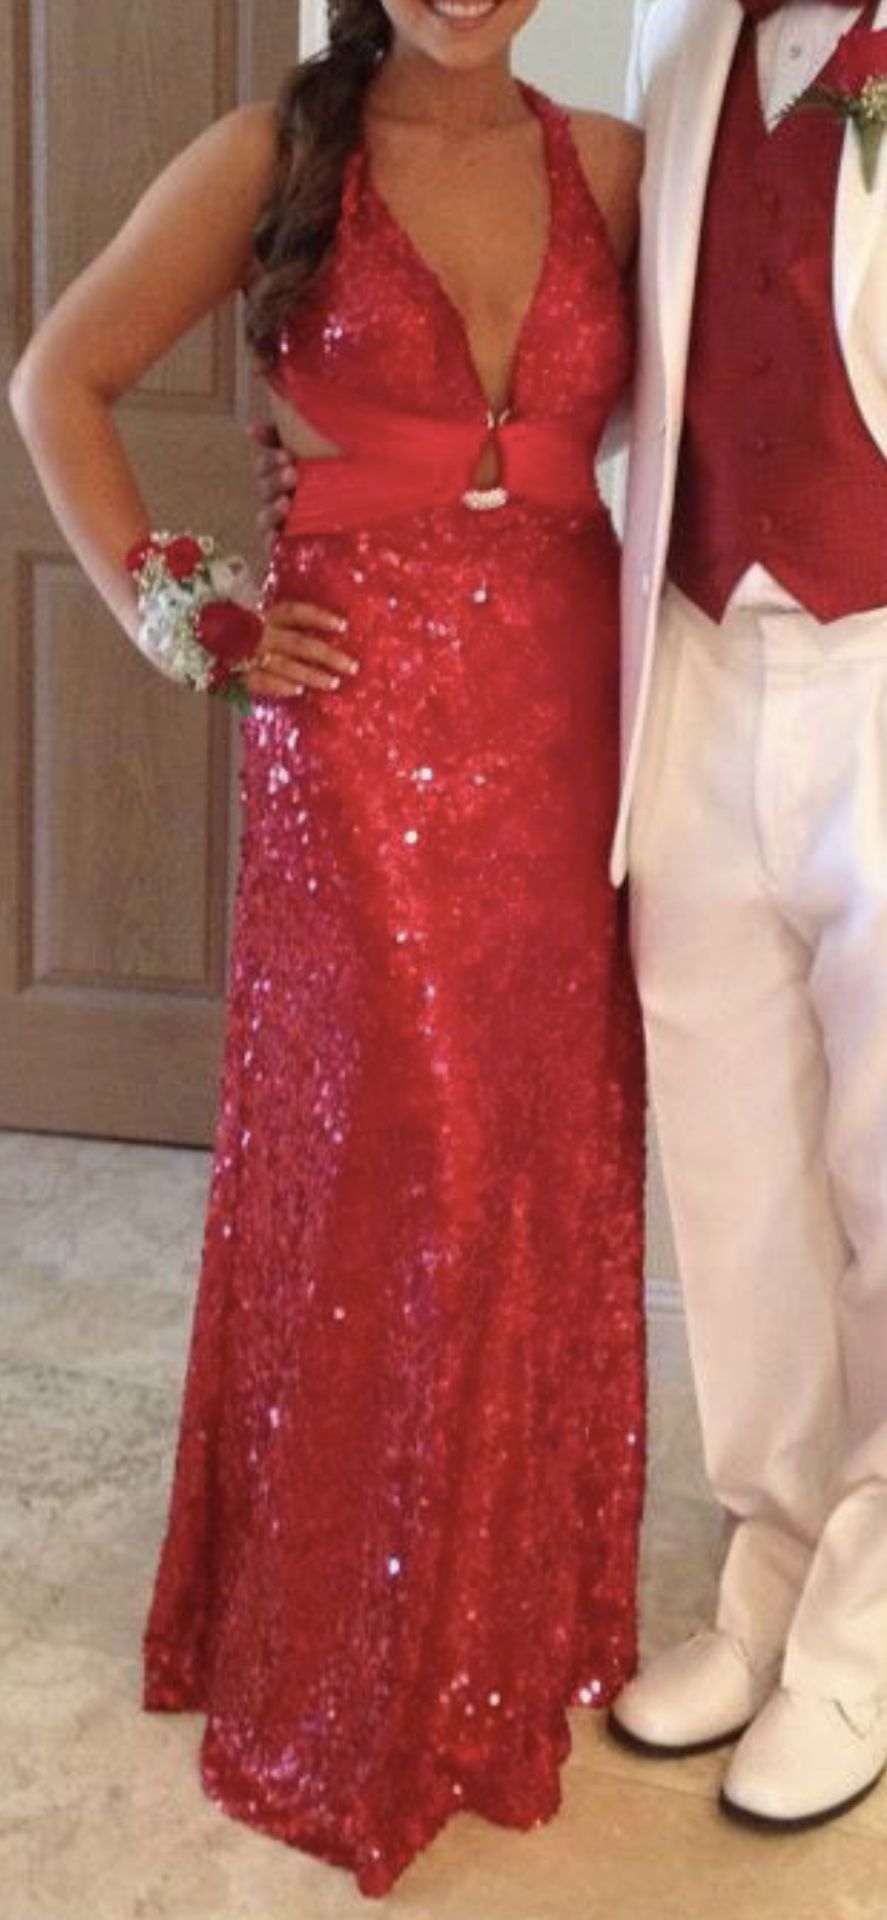 🌀💥Evening Gown/Prom Dress, Beautiful Deep Red, La Femme, fully sequined, worn once, Size 2-4, $100.00